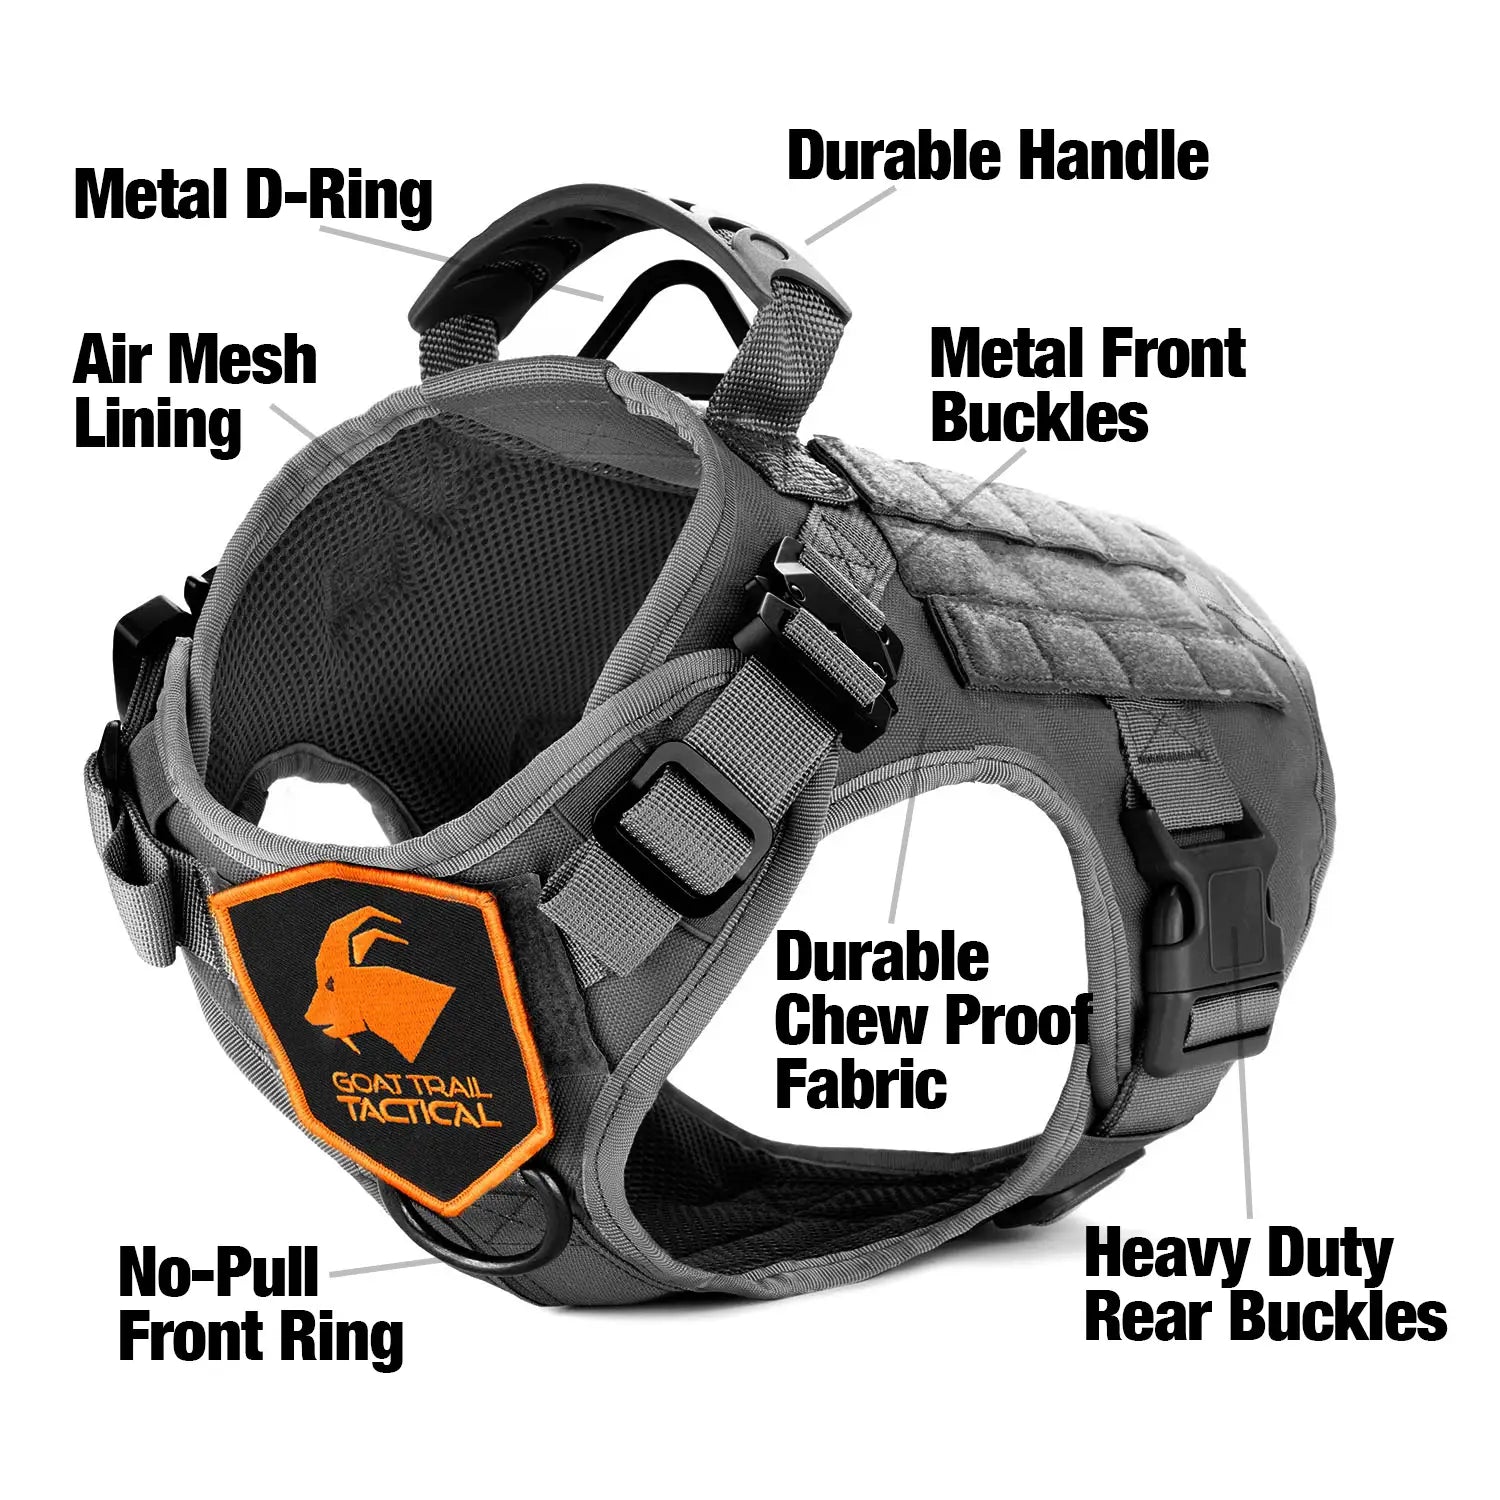 Goat-Trail-Tactical-Heavy-Duty-Harness-Product-Features